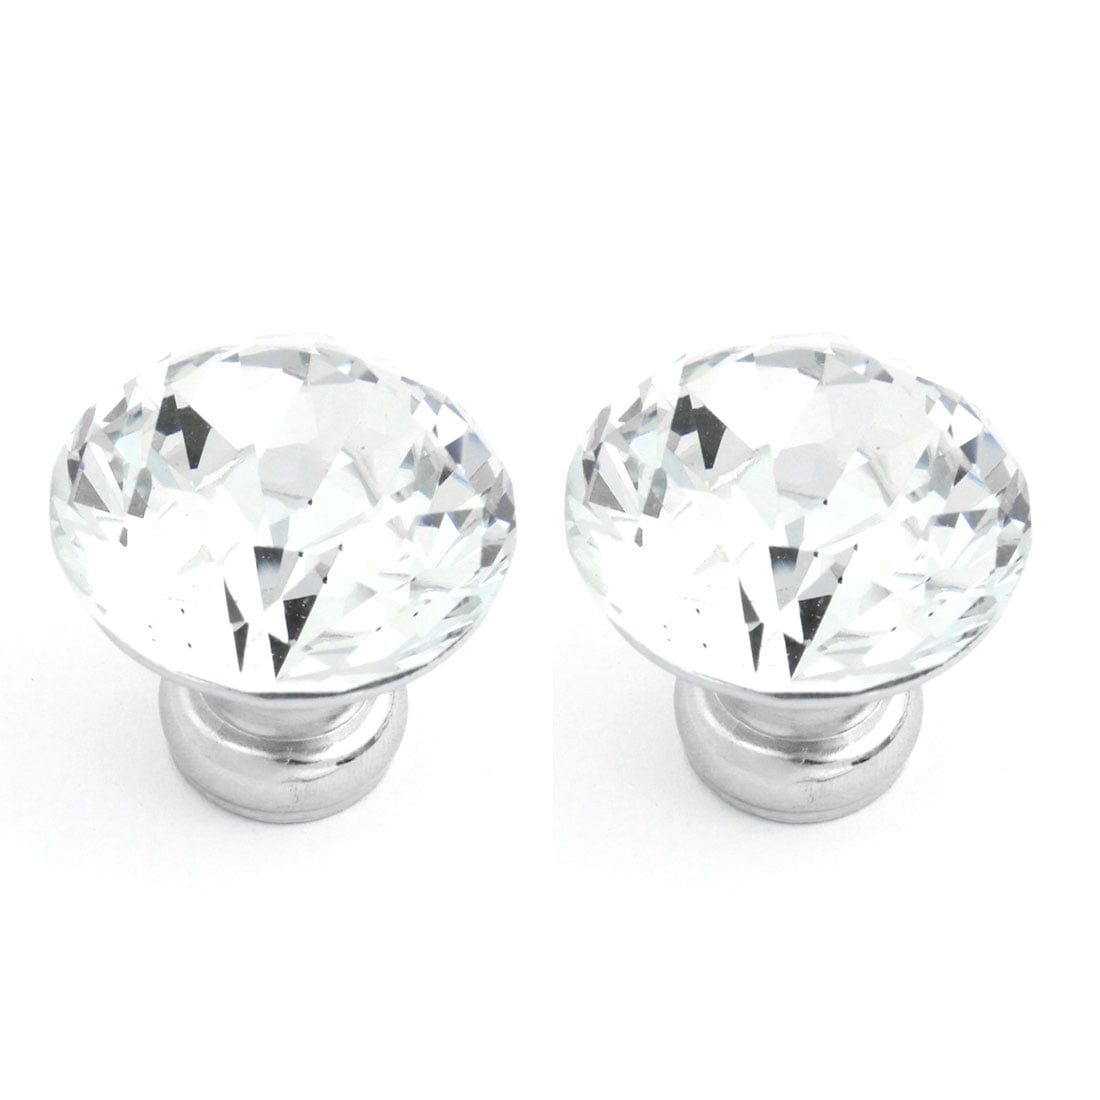 1.2" Bling Faux Crystal Cupboard Dresser Door Pull Handle Round Knob 2 Pieces 